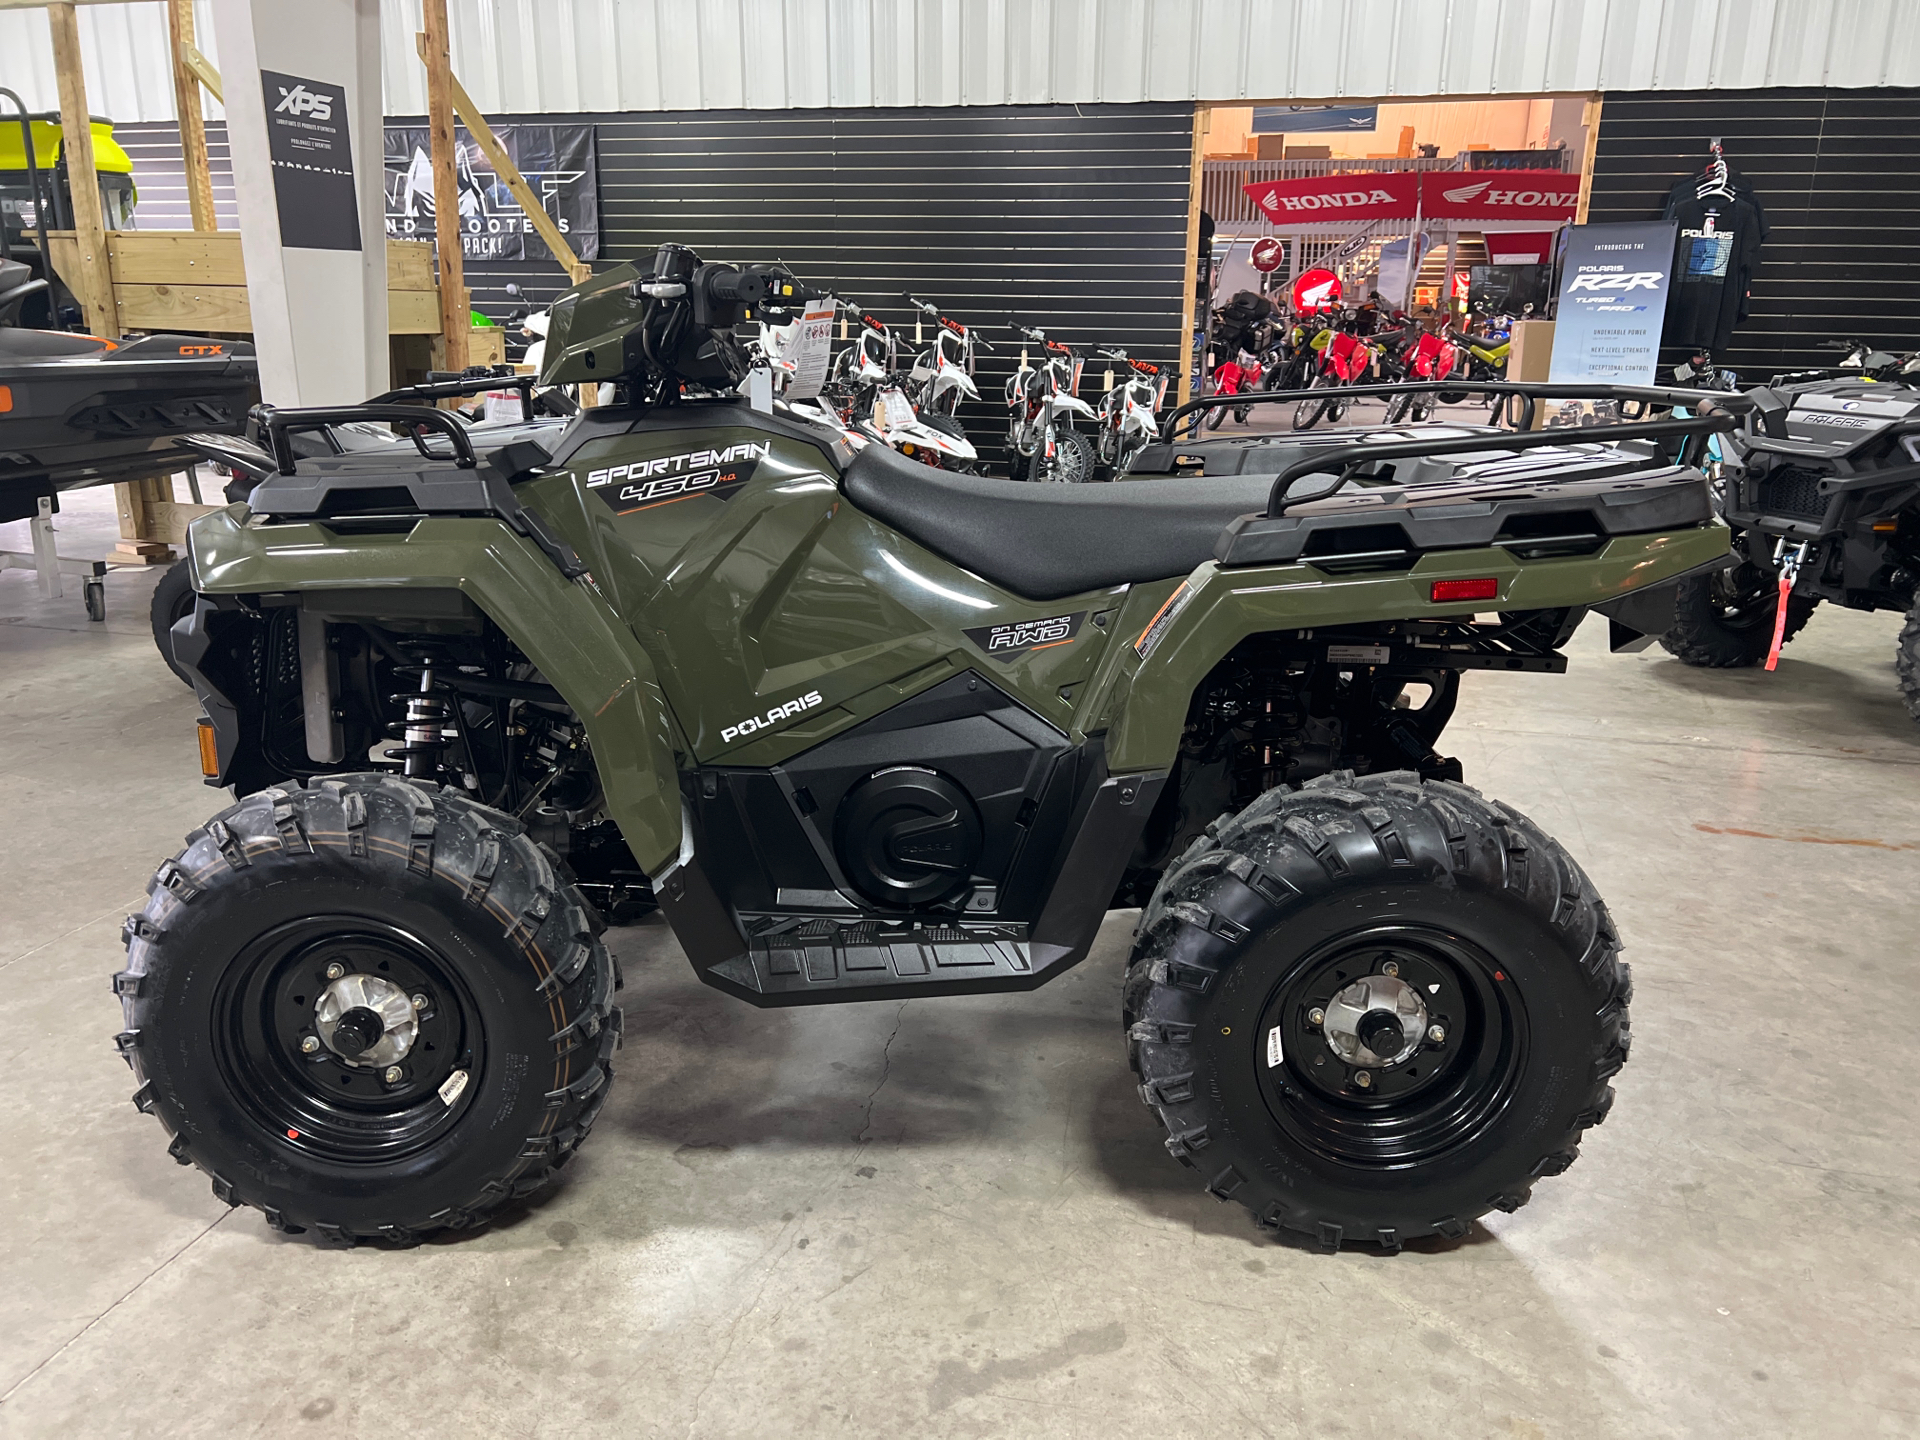 2023 Polaris Sportsman 450 H.O. EPS in Crossville, Tennessee - Photo 4